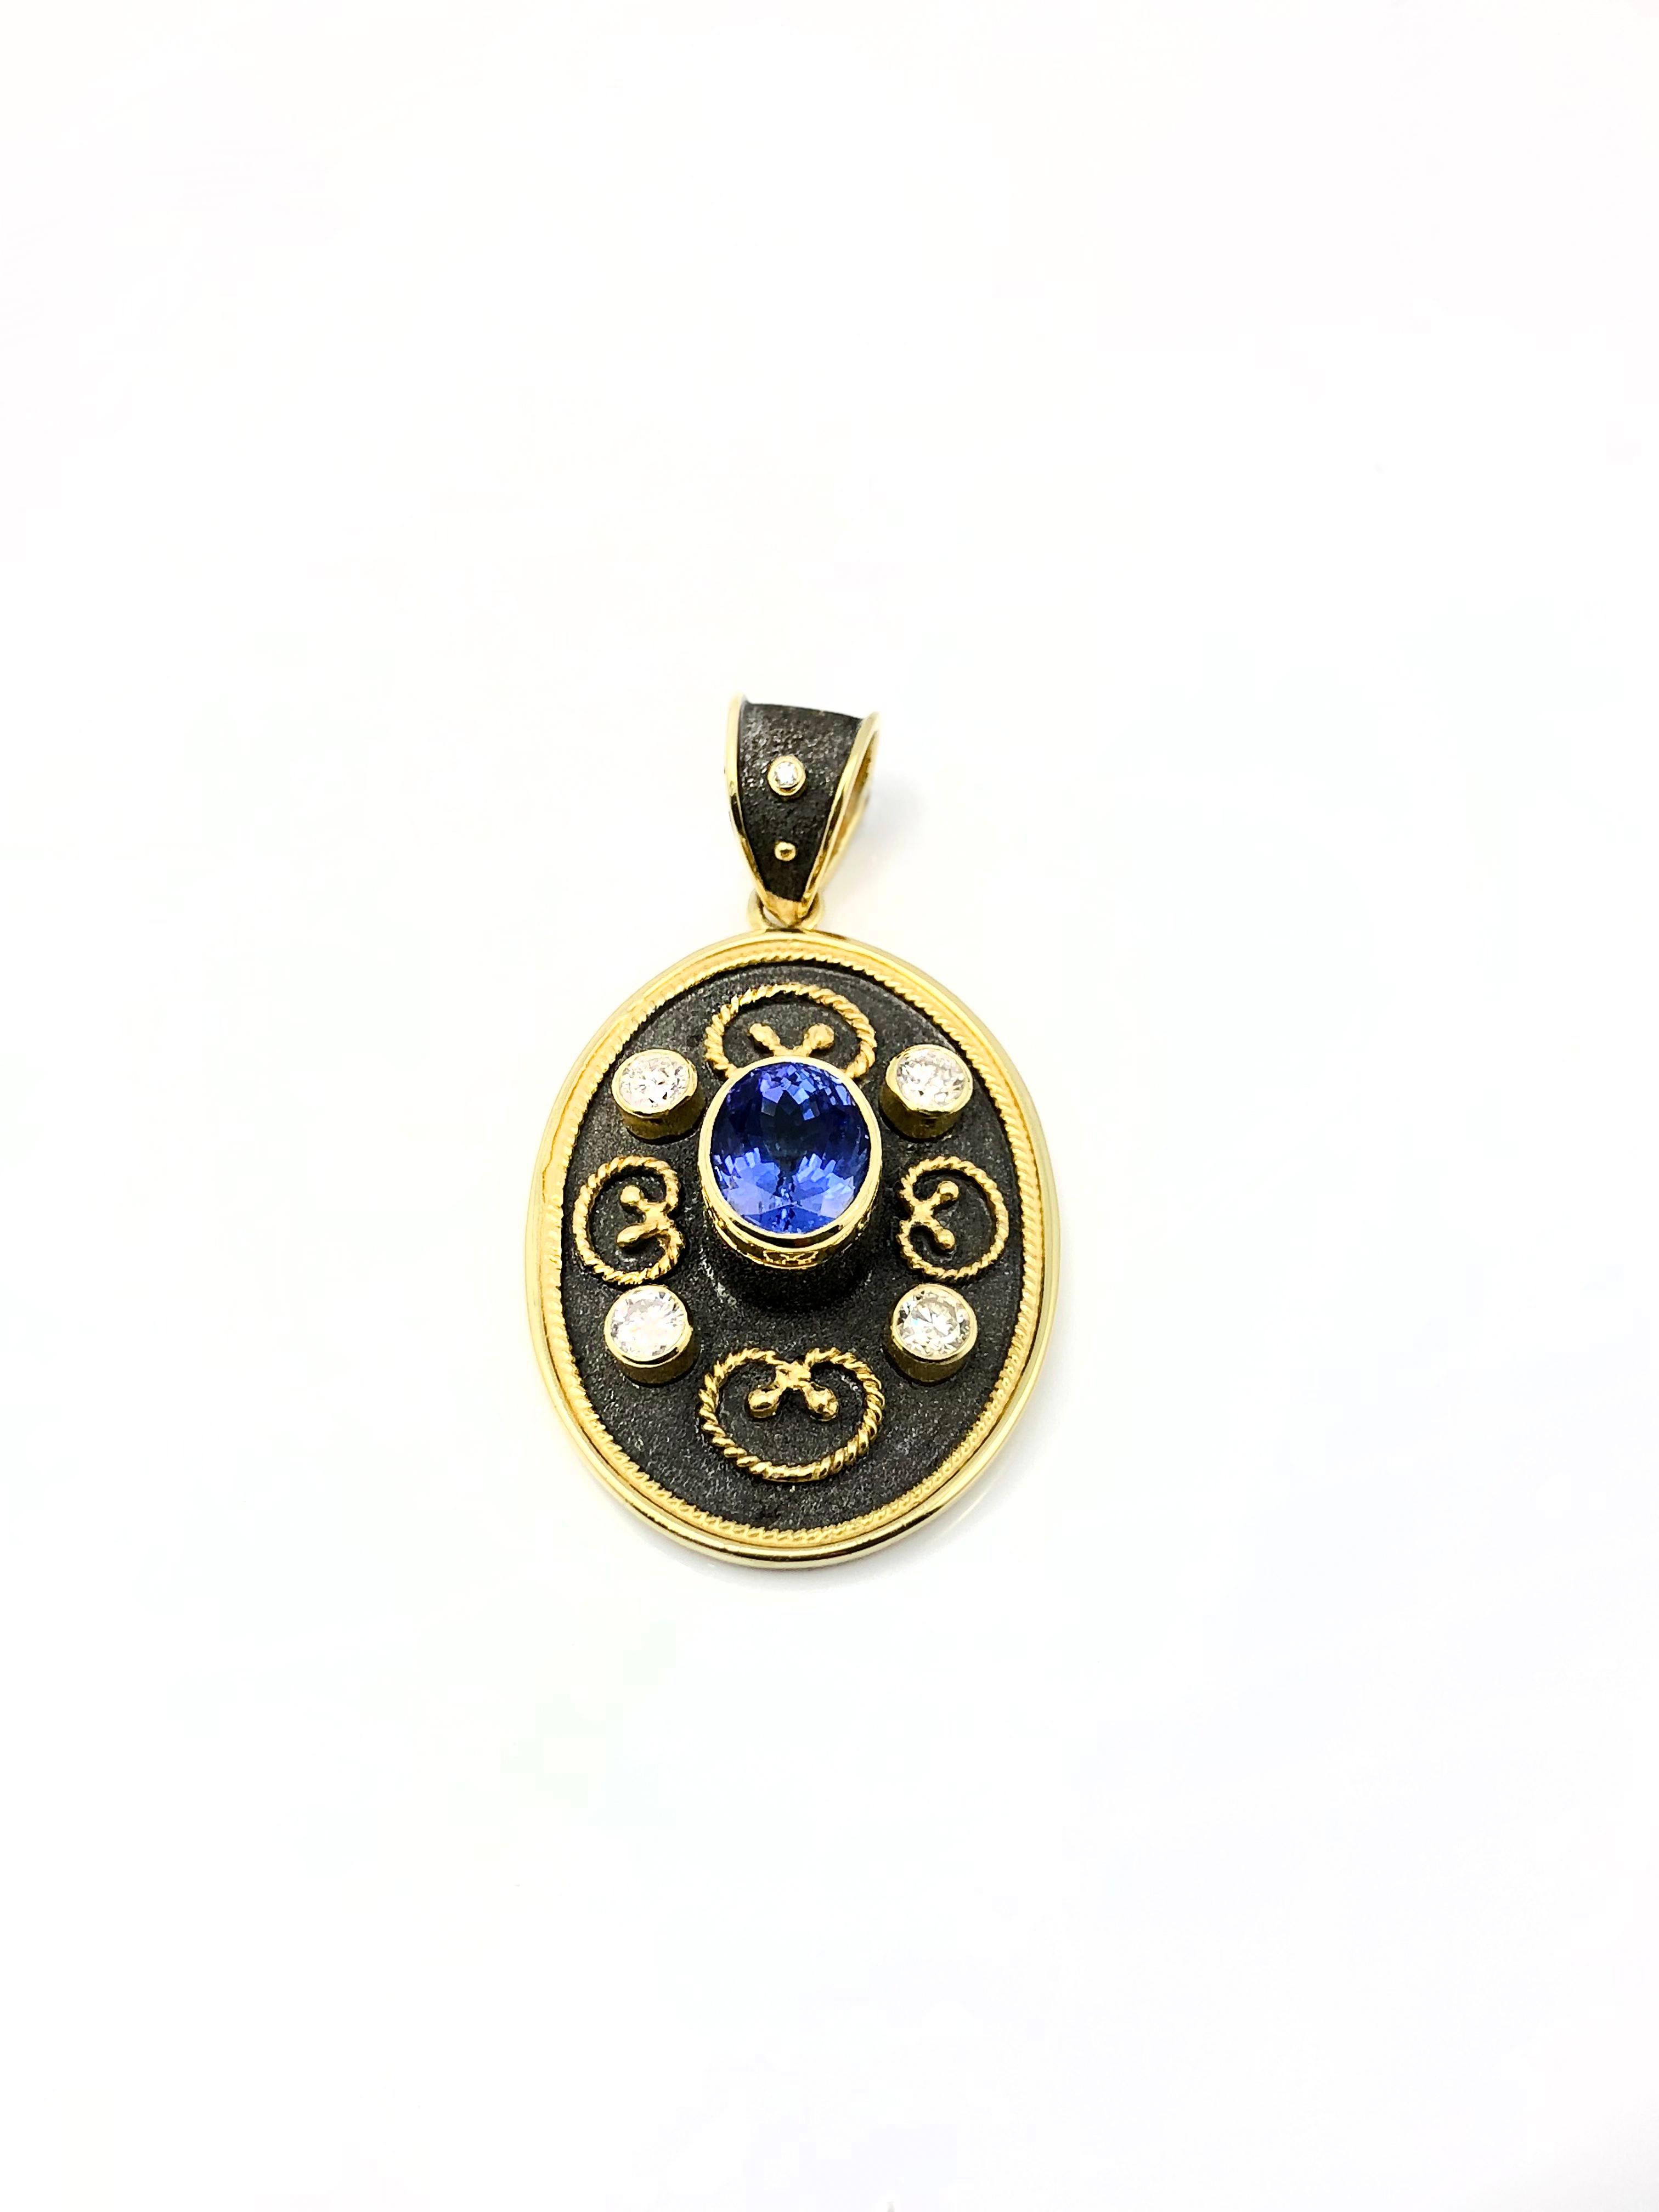 S.Georgios designer pendant is handmade from solid 18 Karat Yellow Gold and all custom-made. This stunning Oval pendant is microscopically decorated with granulation details - beads and wires, contrast with a unique byzantine velvet background